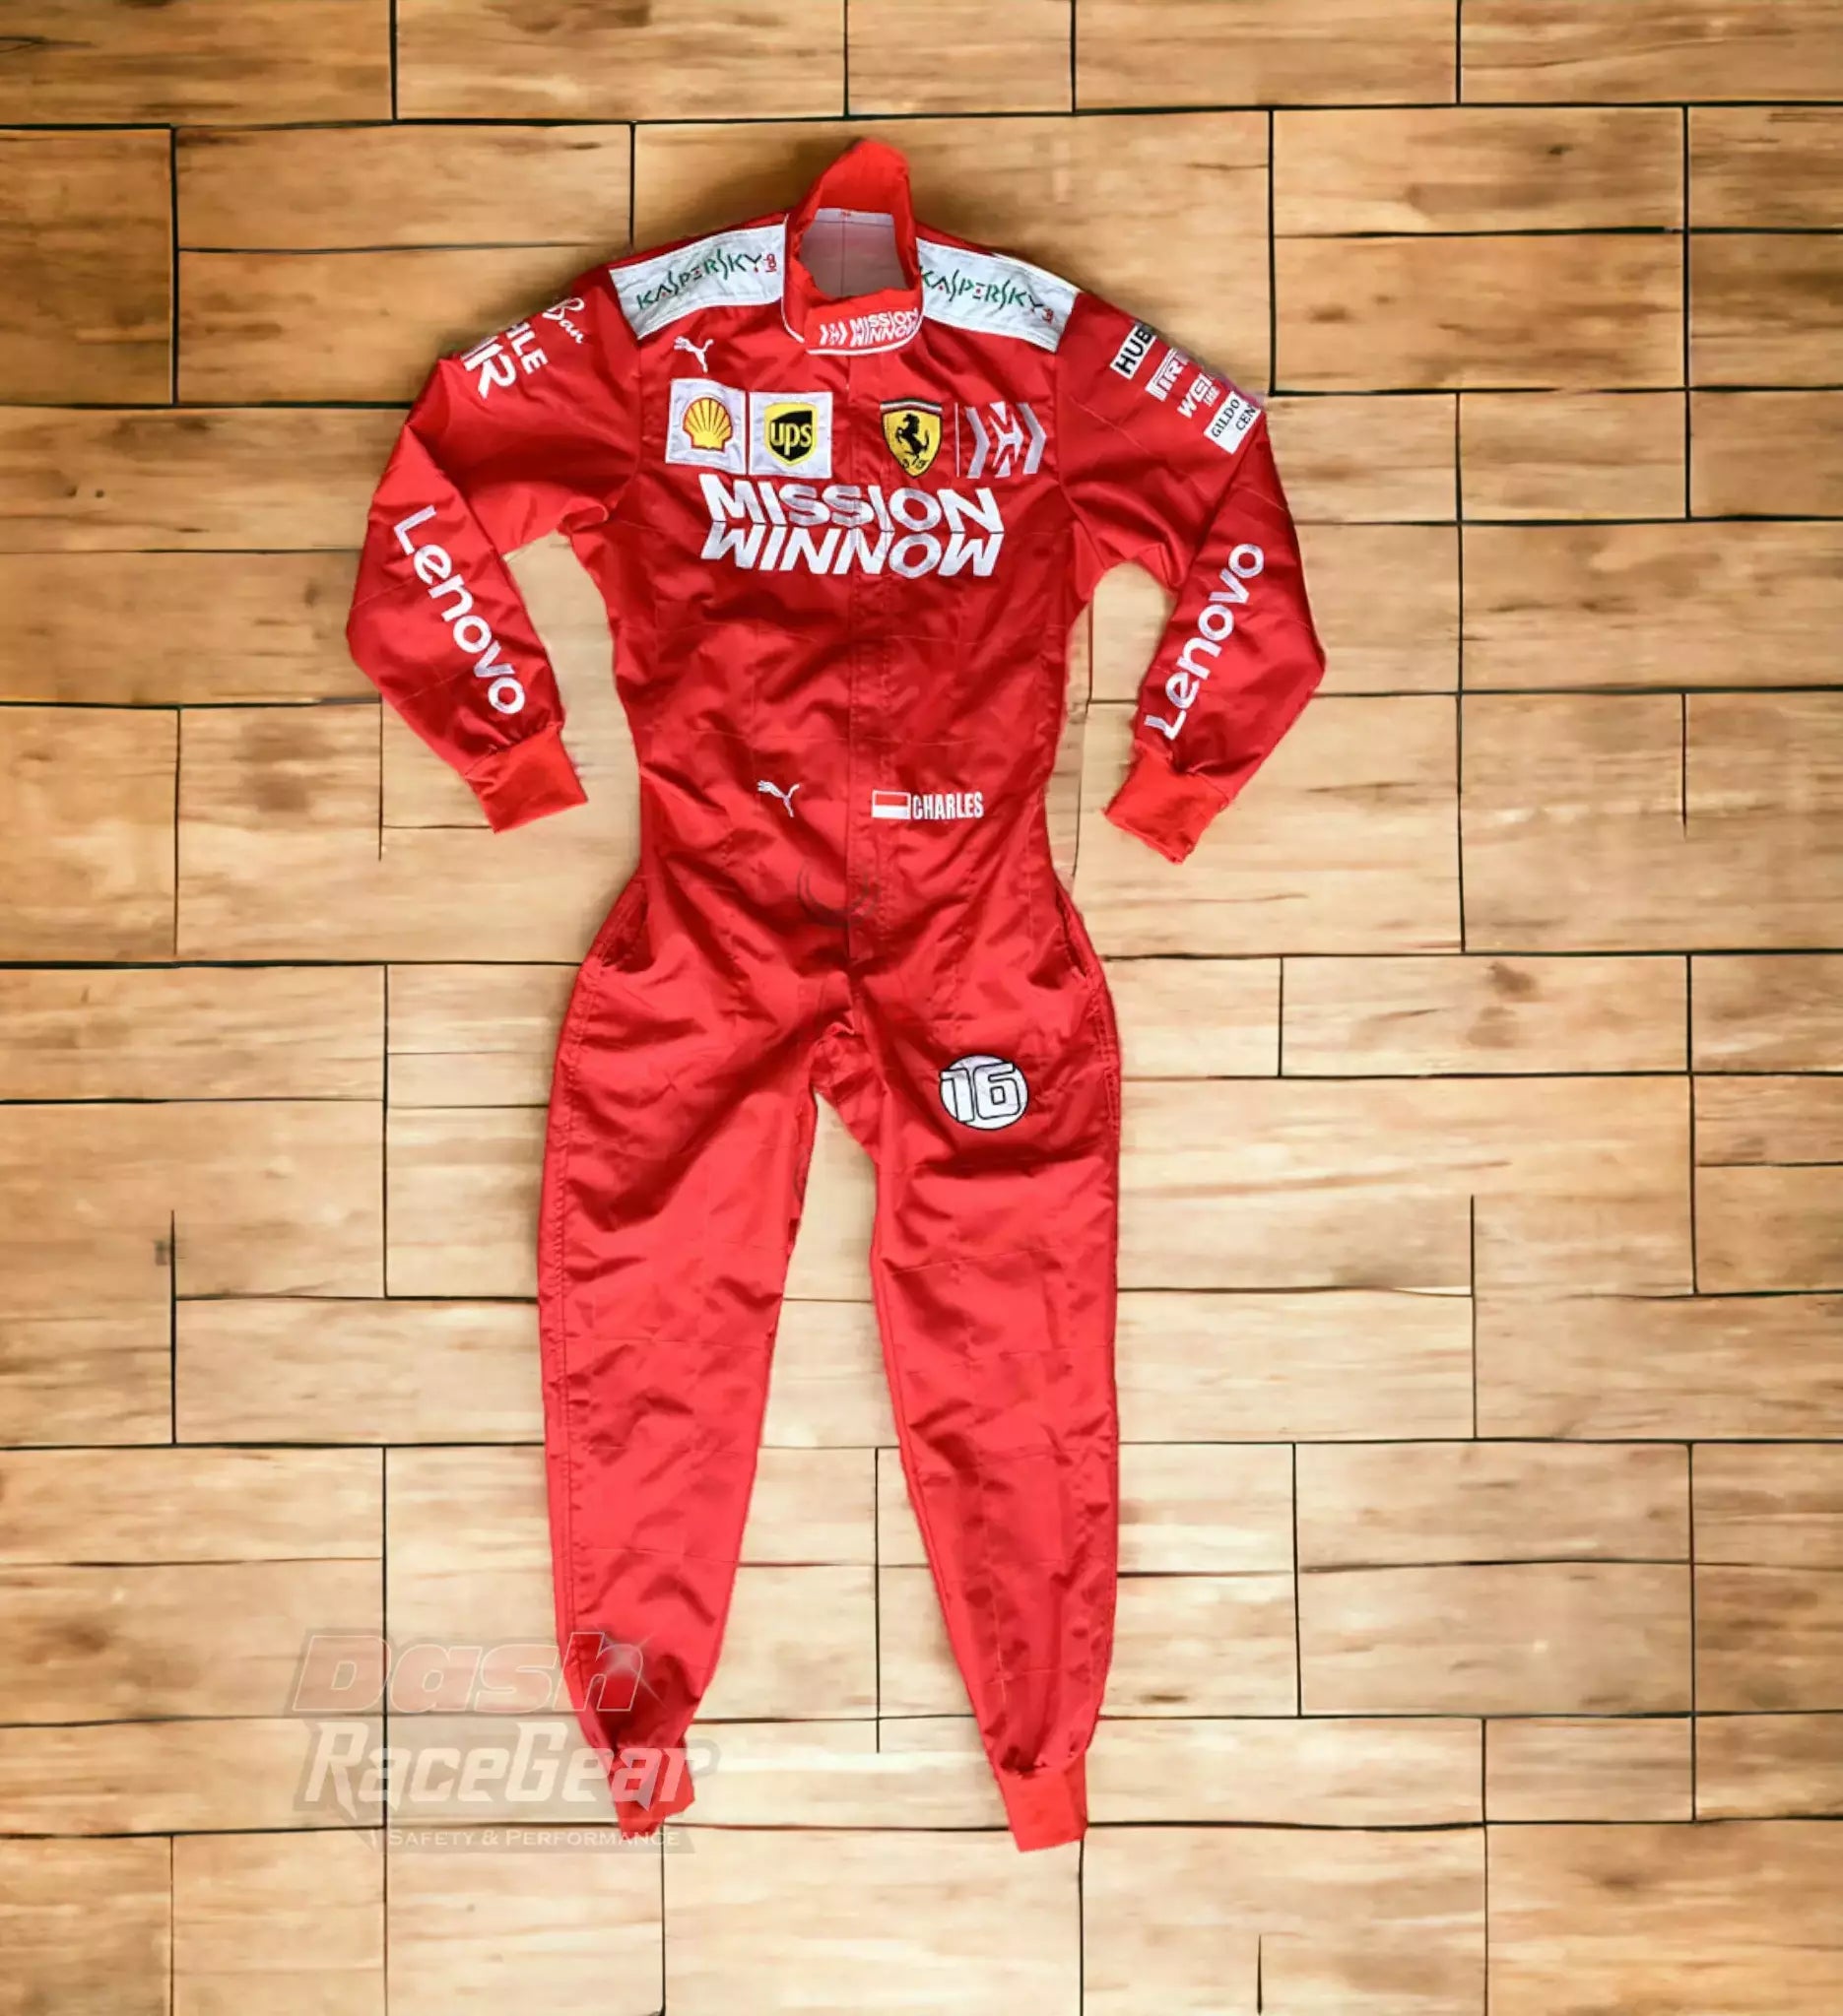 2019 Charles Leclerc Ferrari Mission Winnow F1 Embroidered Racing Suit